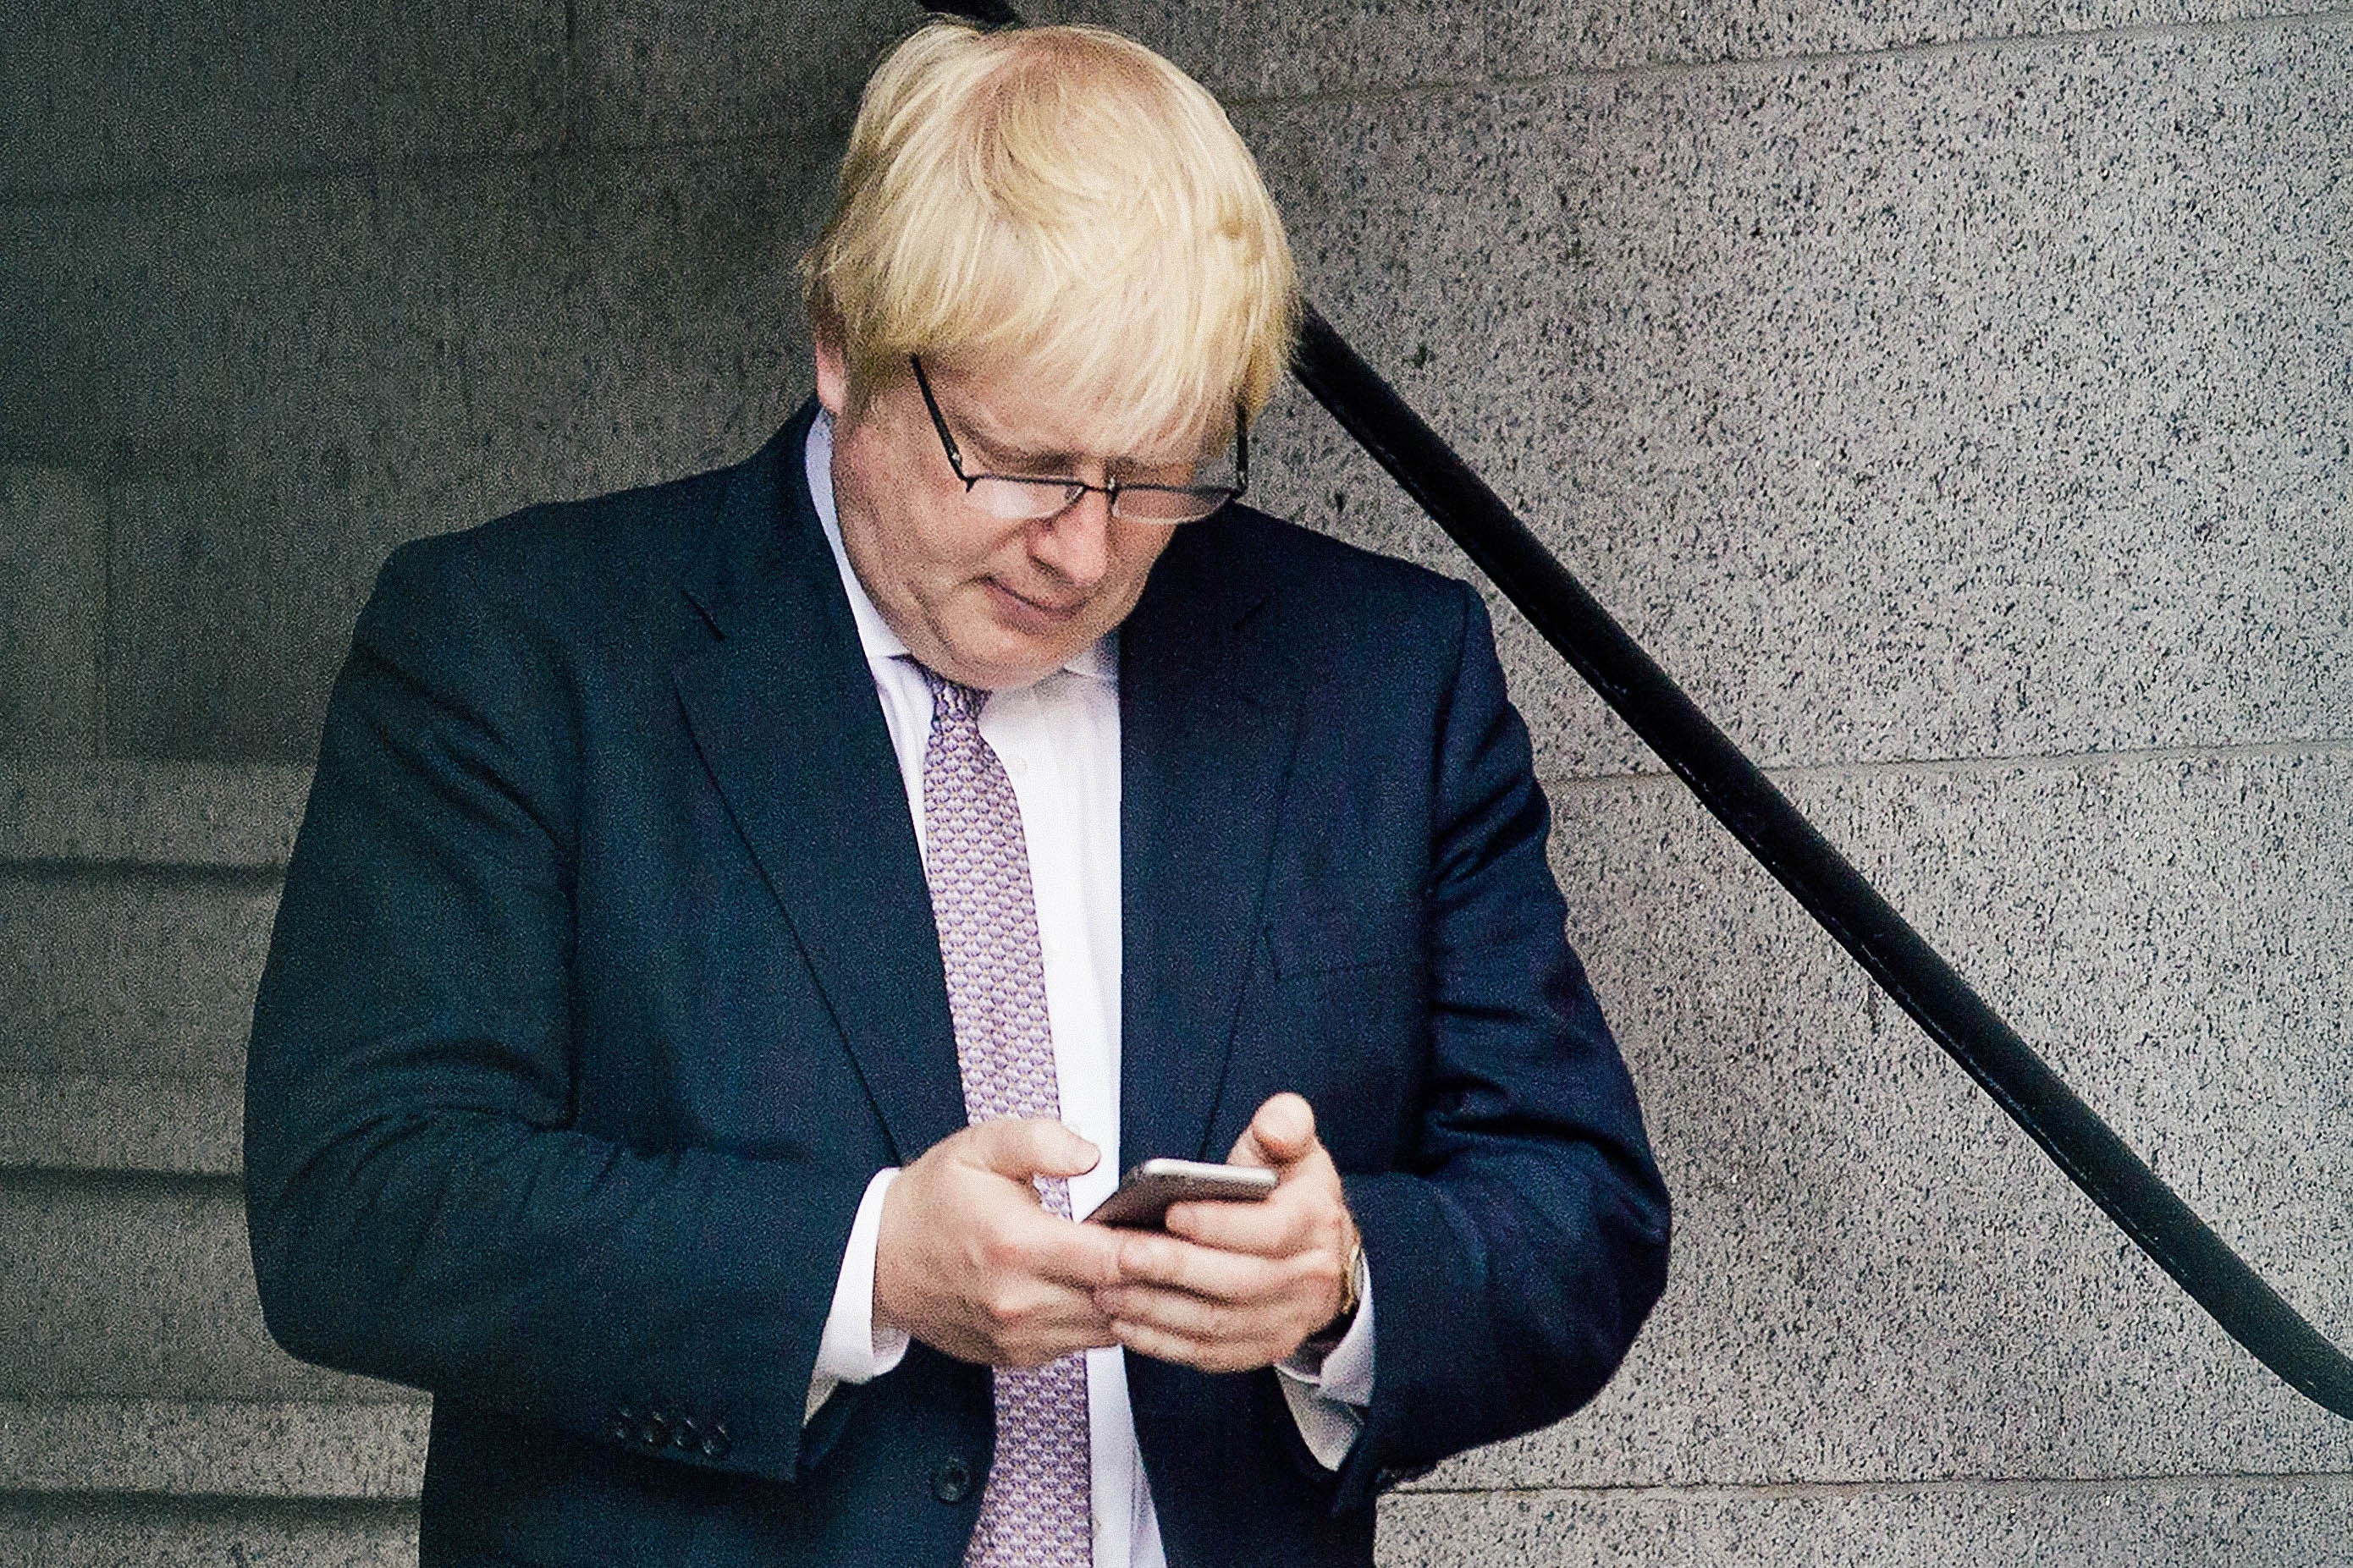 Boris Johnson looks down at a smartphone with his glasses on and a pensive expression.